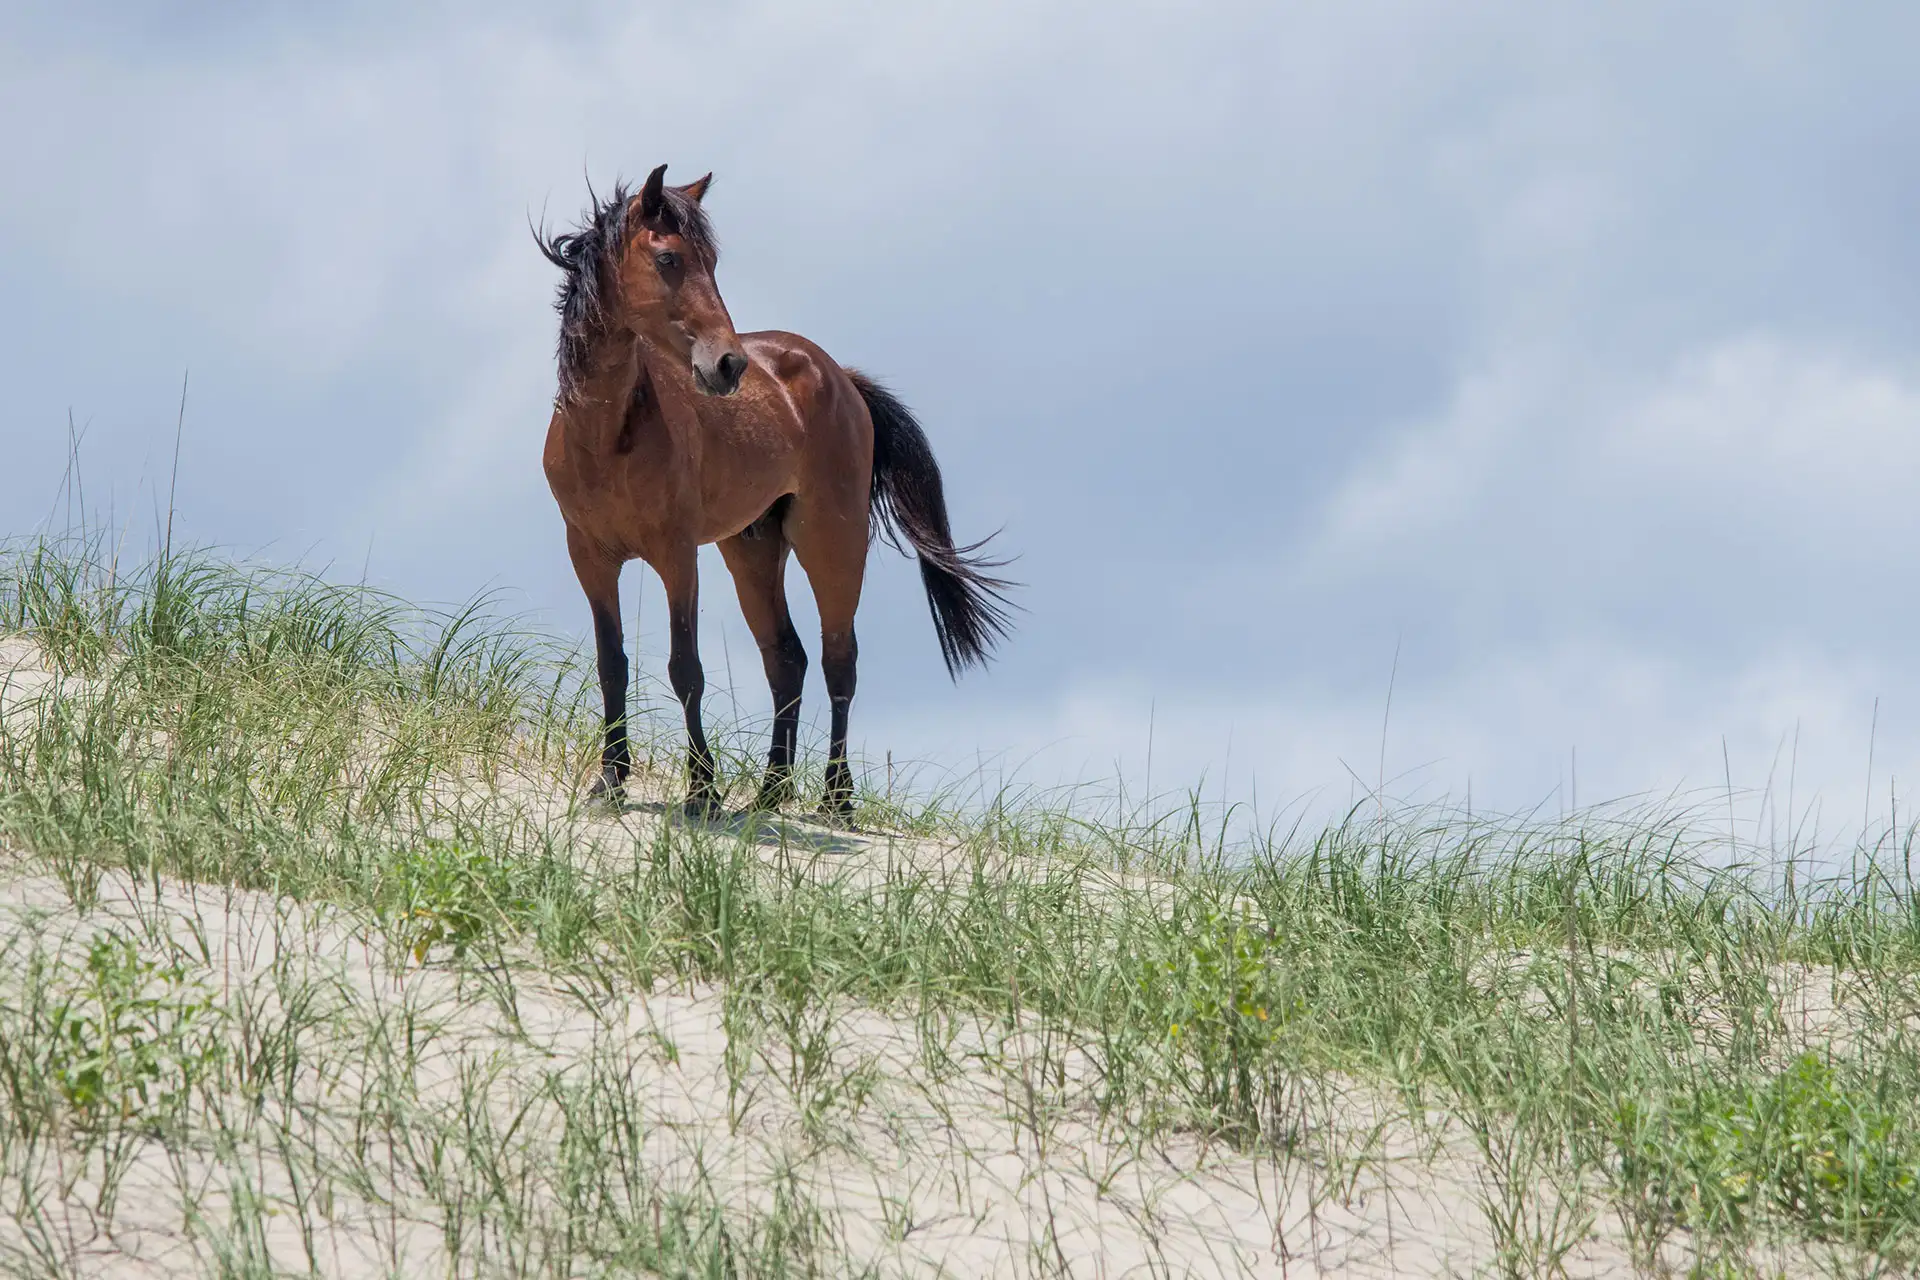 Wild Horse in Outer Banks, North Carolina; Courtesy of BHamm/Shutterstock.com